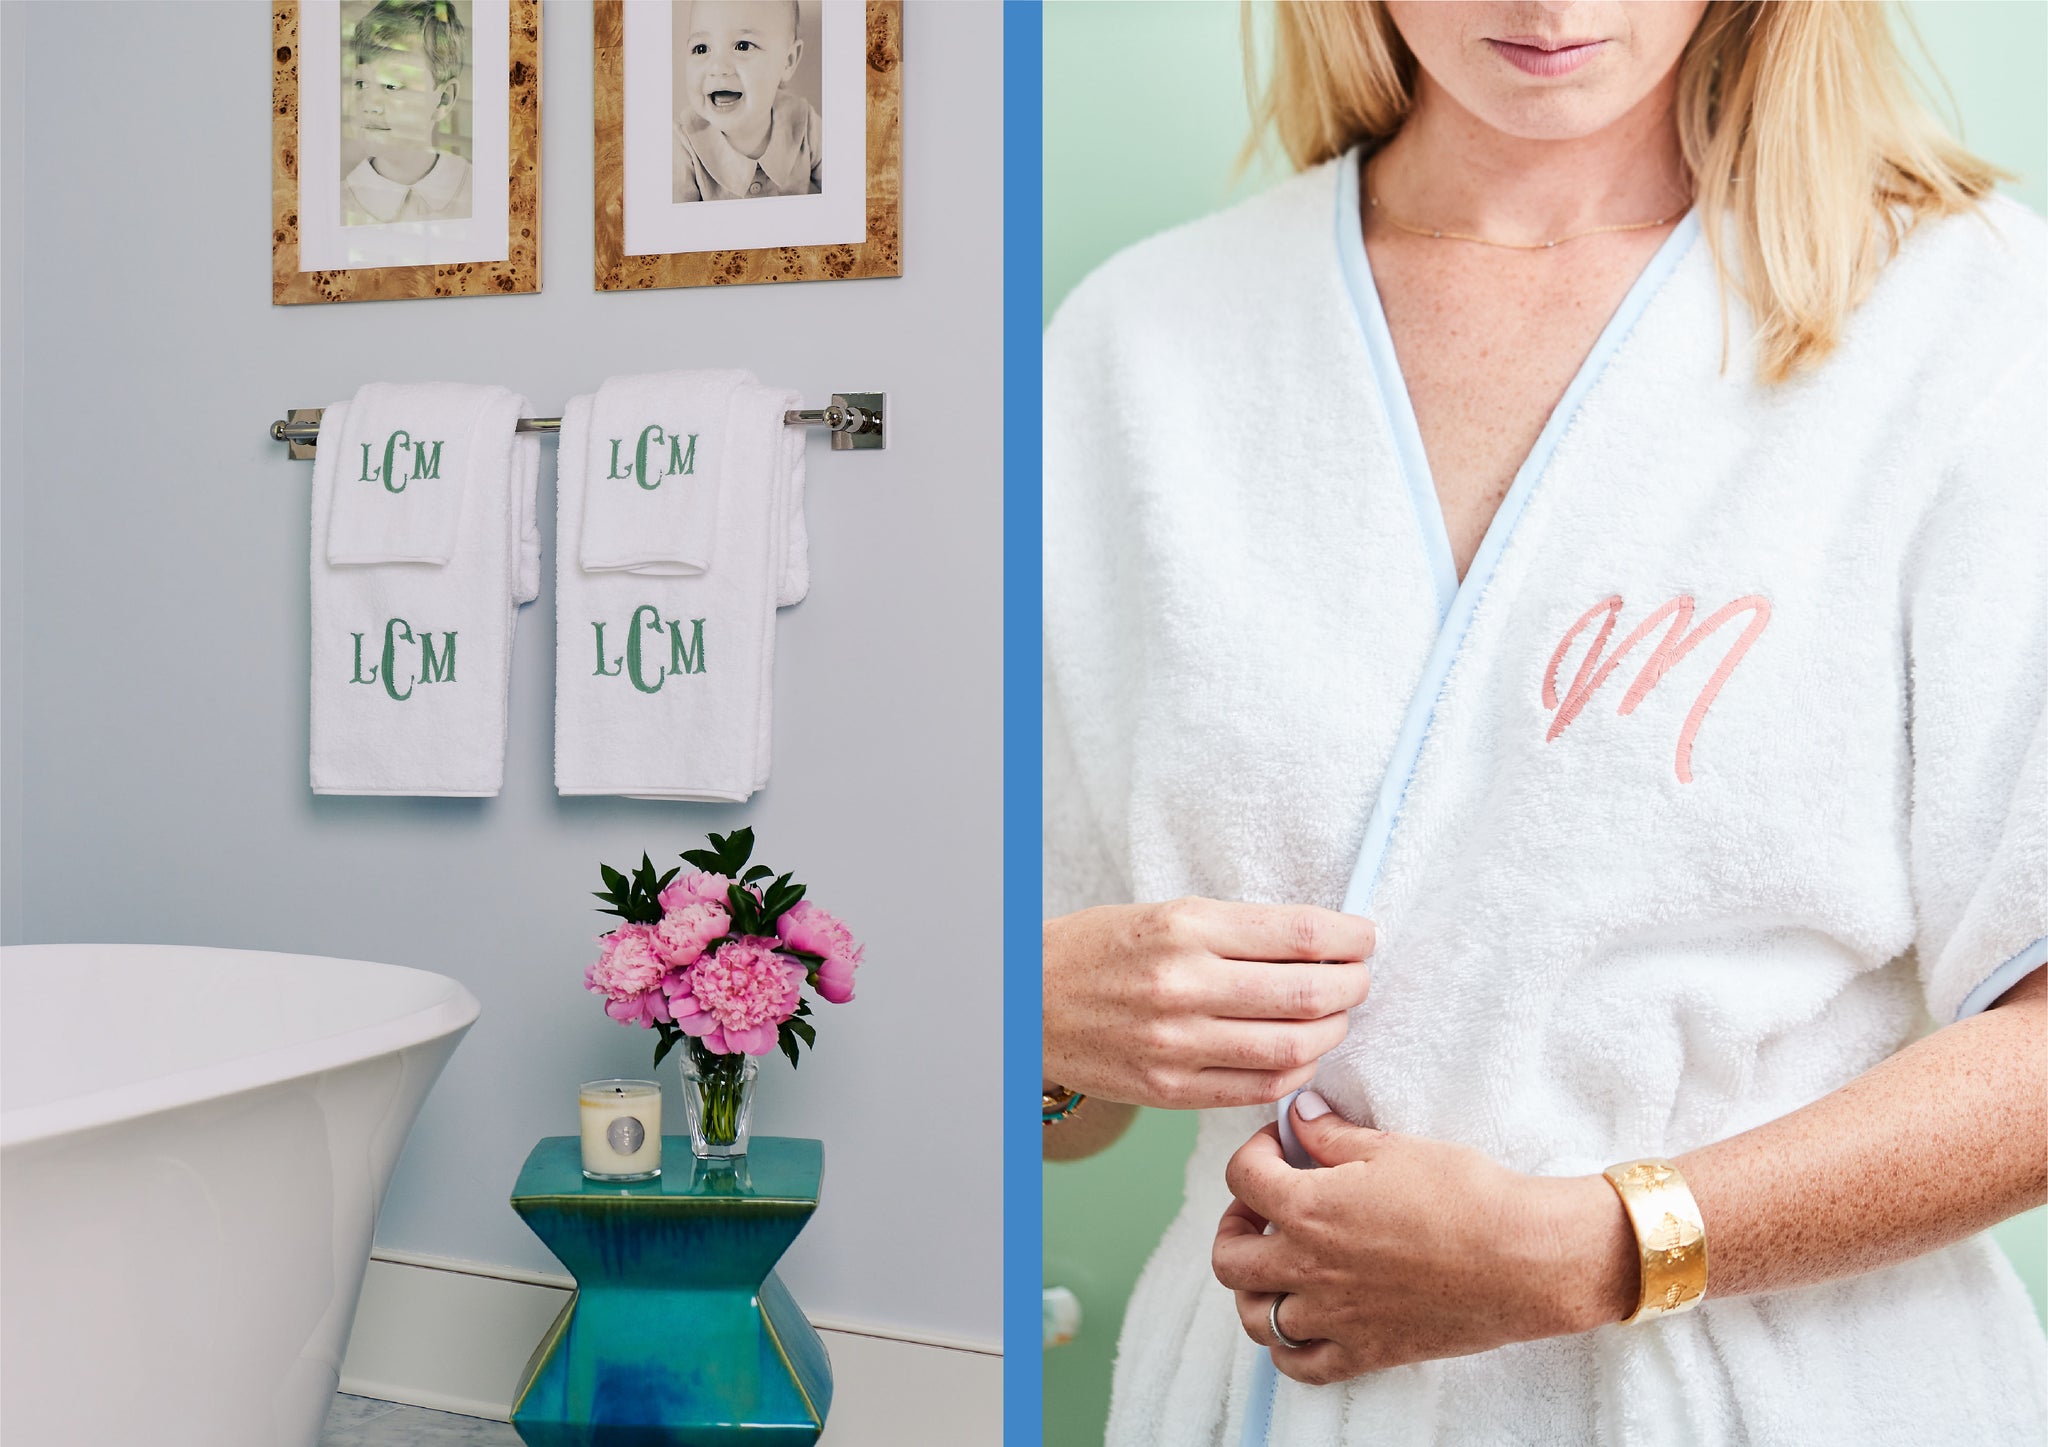 Monogrammed and Embroidered Towels Guide